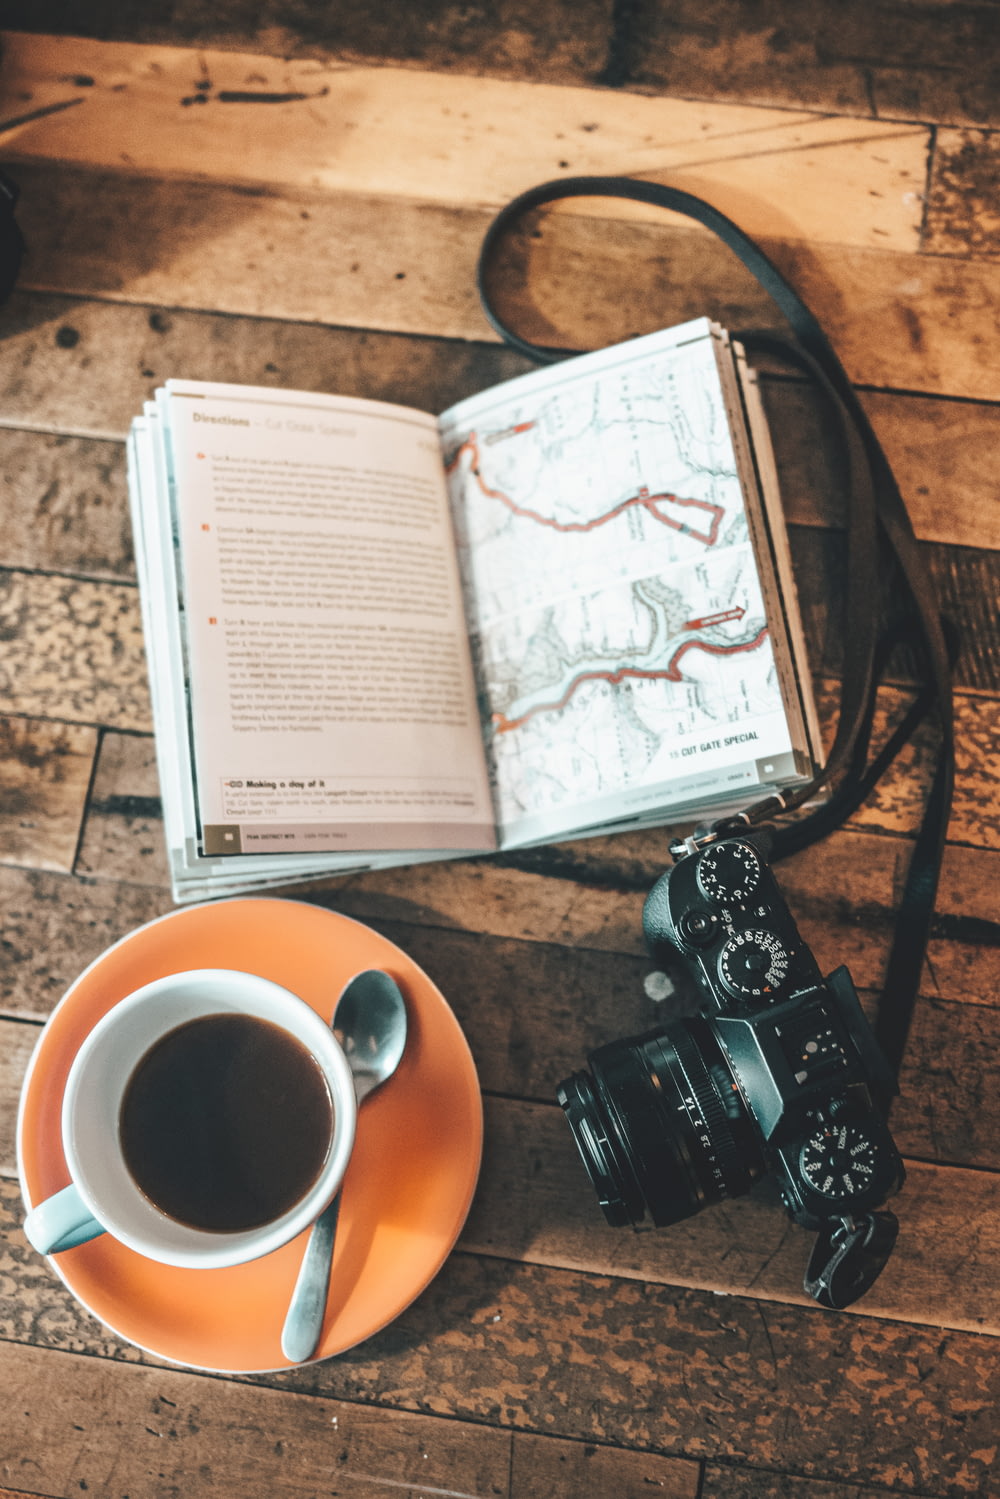 a camera, a book, and a cup of coffee on a table